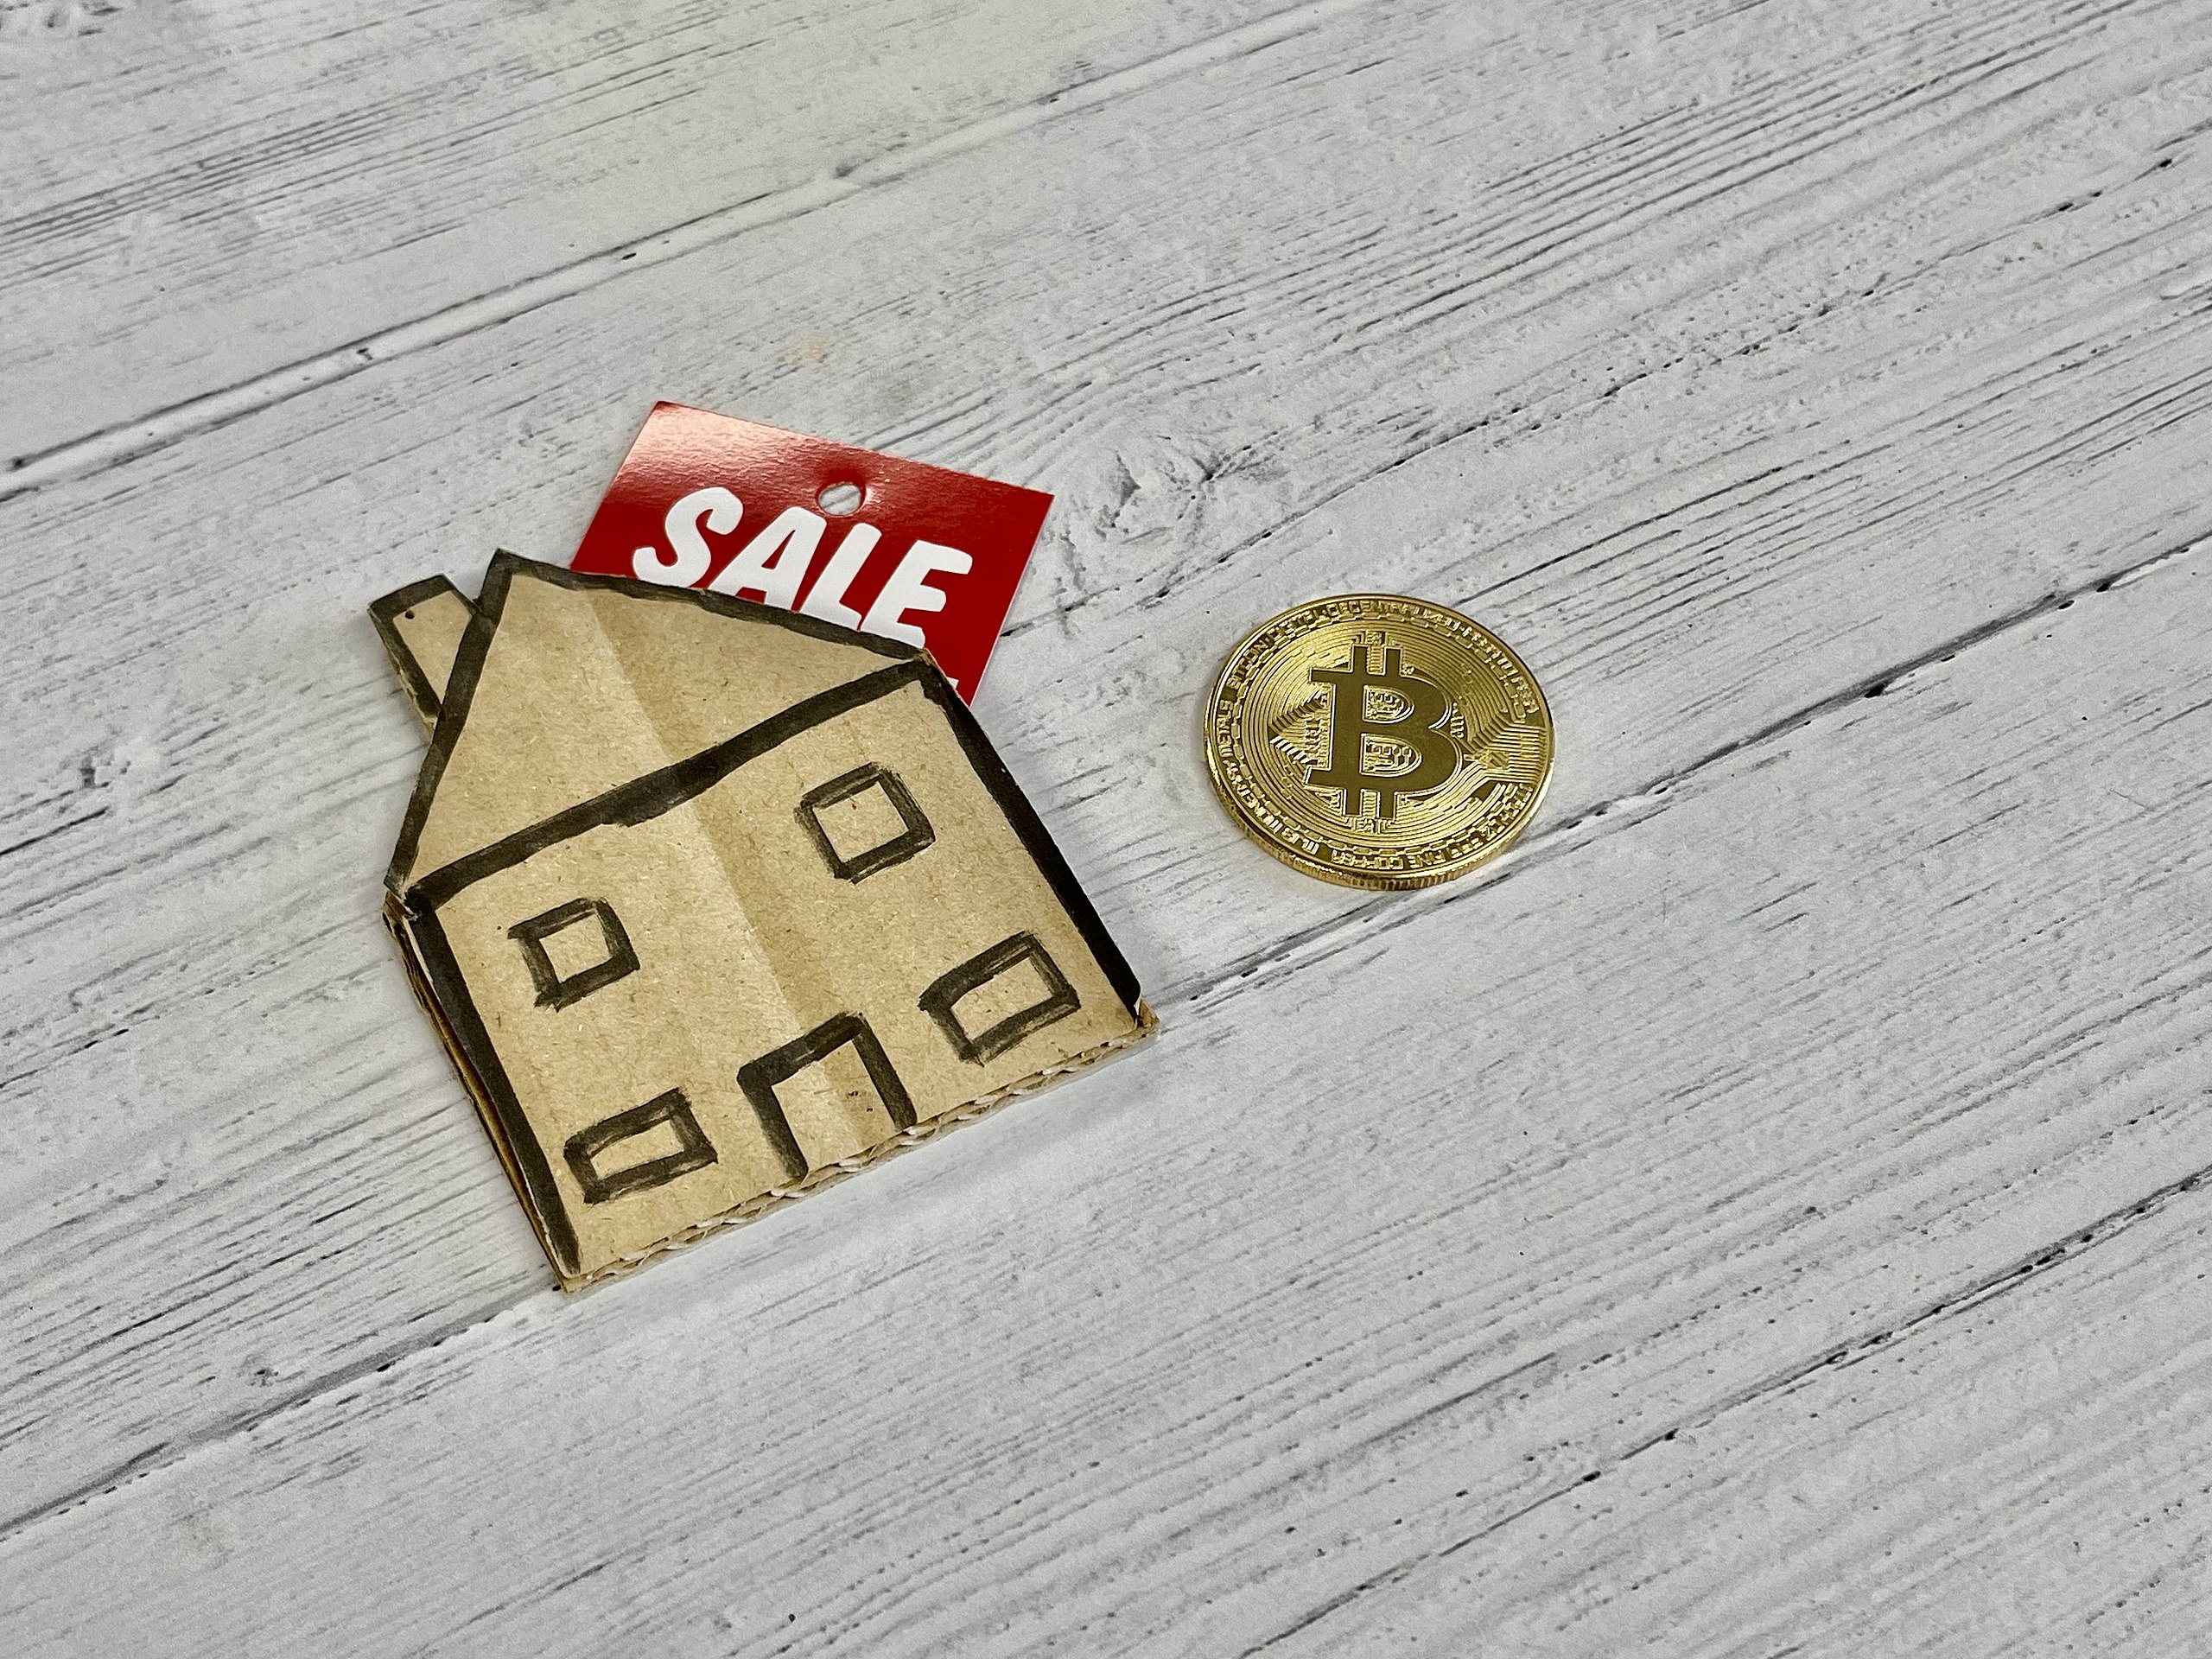 File:Buying a house with Bitcoin - 51244282137.jpg - Wikimedia Commons